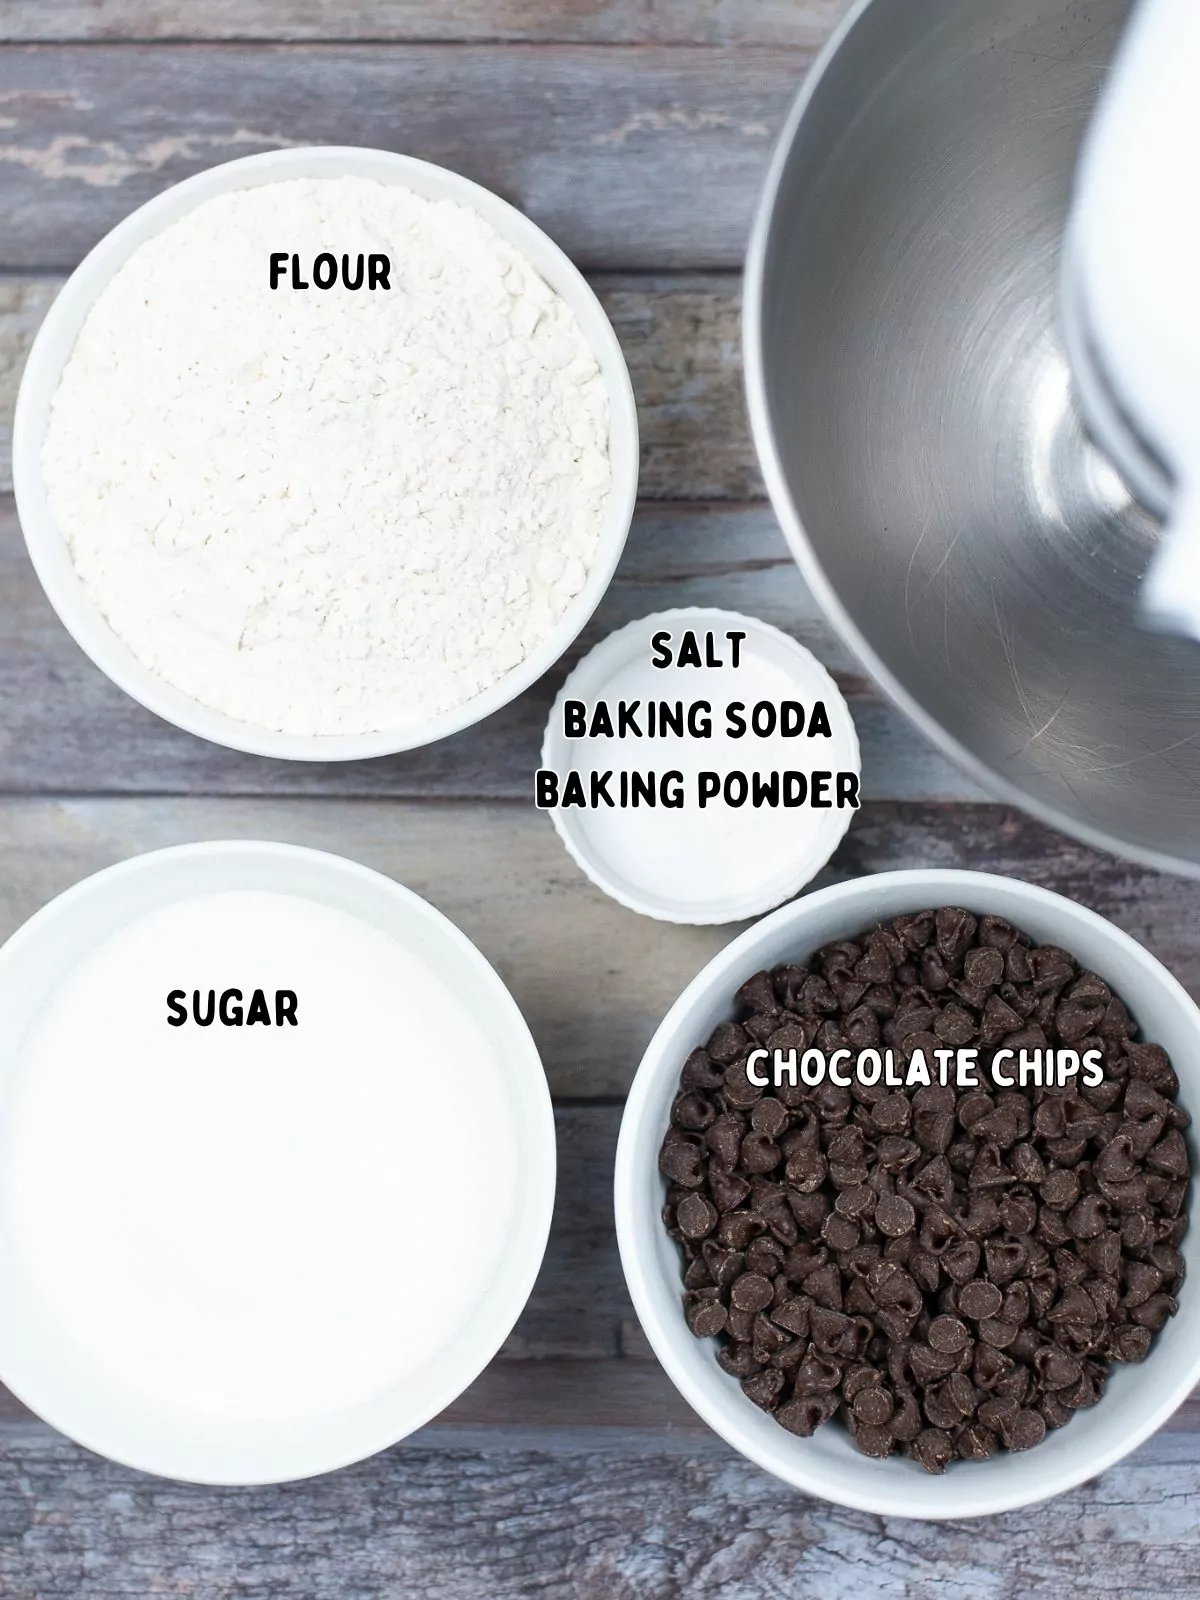 Ingredients for muffin mix